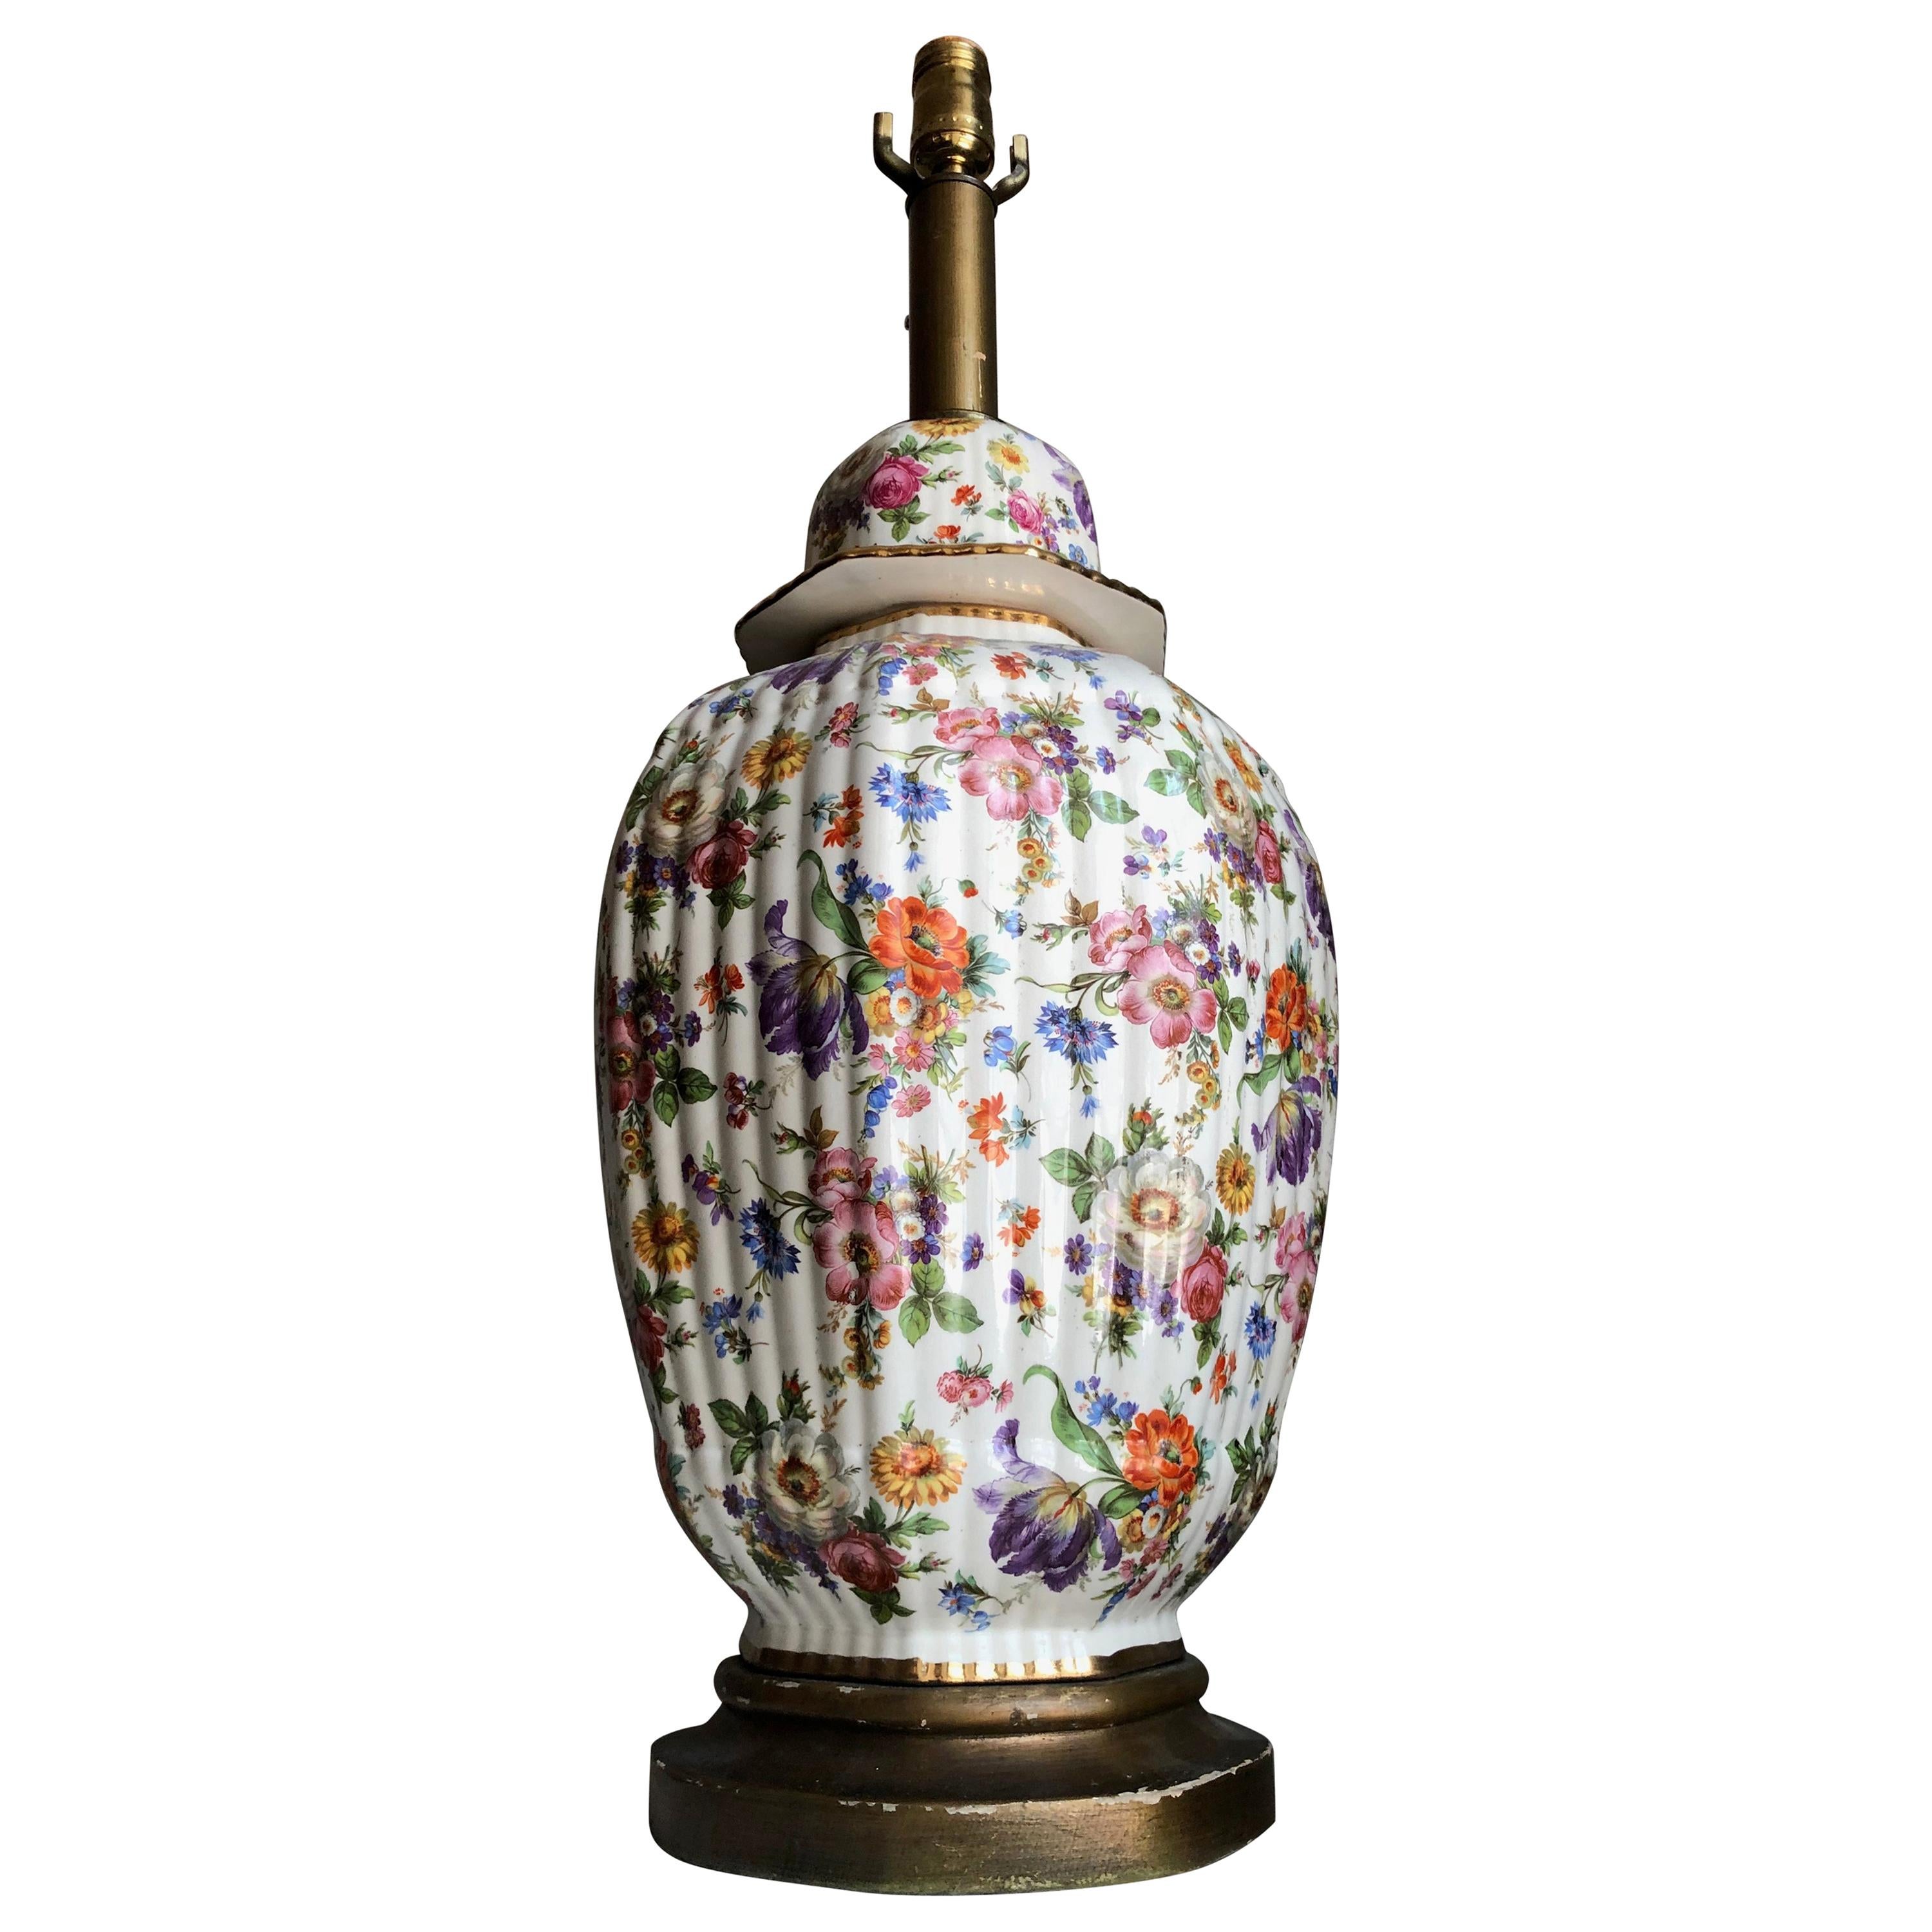 Gorgeous and monumental gilt hand painted floral Porcelain chinoiserie ginger jar wired as lamp. Lovely scale and proportions. Genius use of color.